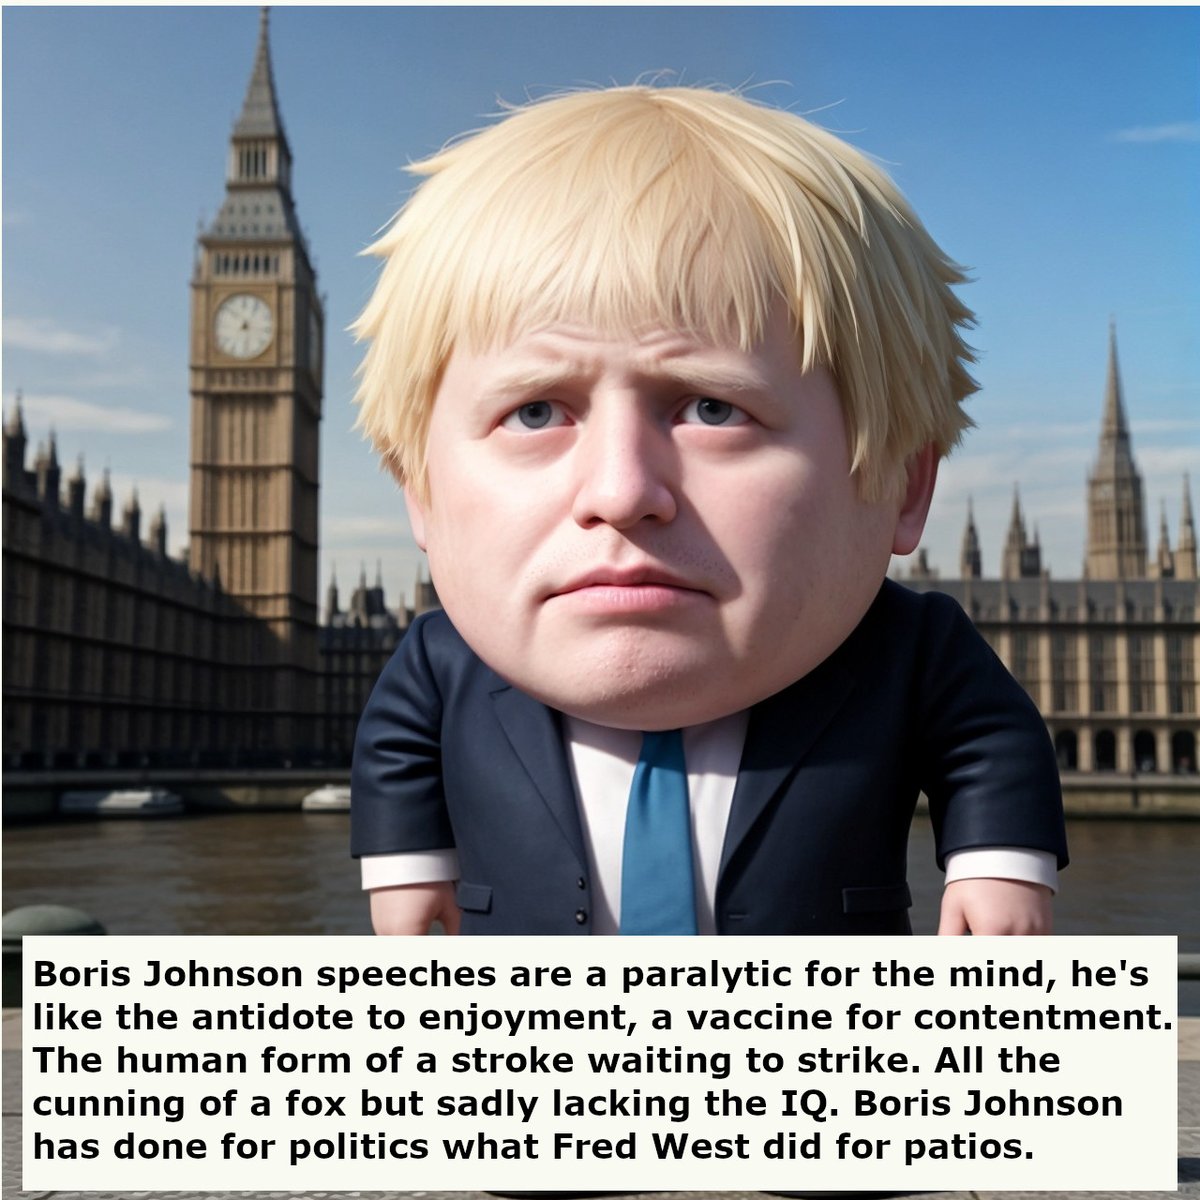 @BladeoftheS @Chanctonman Bojo is one of the most repugnant human beings ever to climb down from the trees, or even to walk out of the ocean for that matter. A truly distasteful and disreputable manchild who's been a petty tantrum since childhood. A full-on kleptocratic cockwomble...